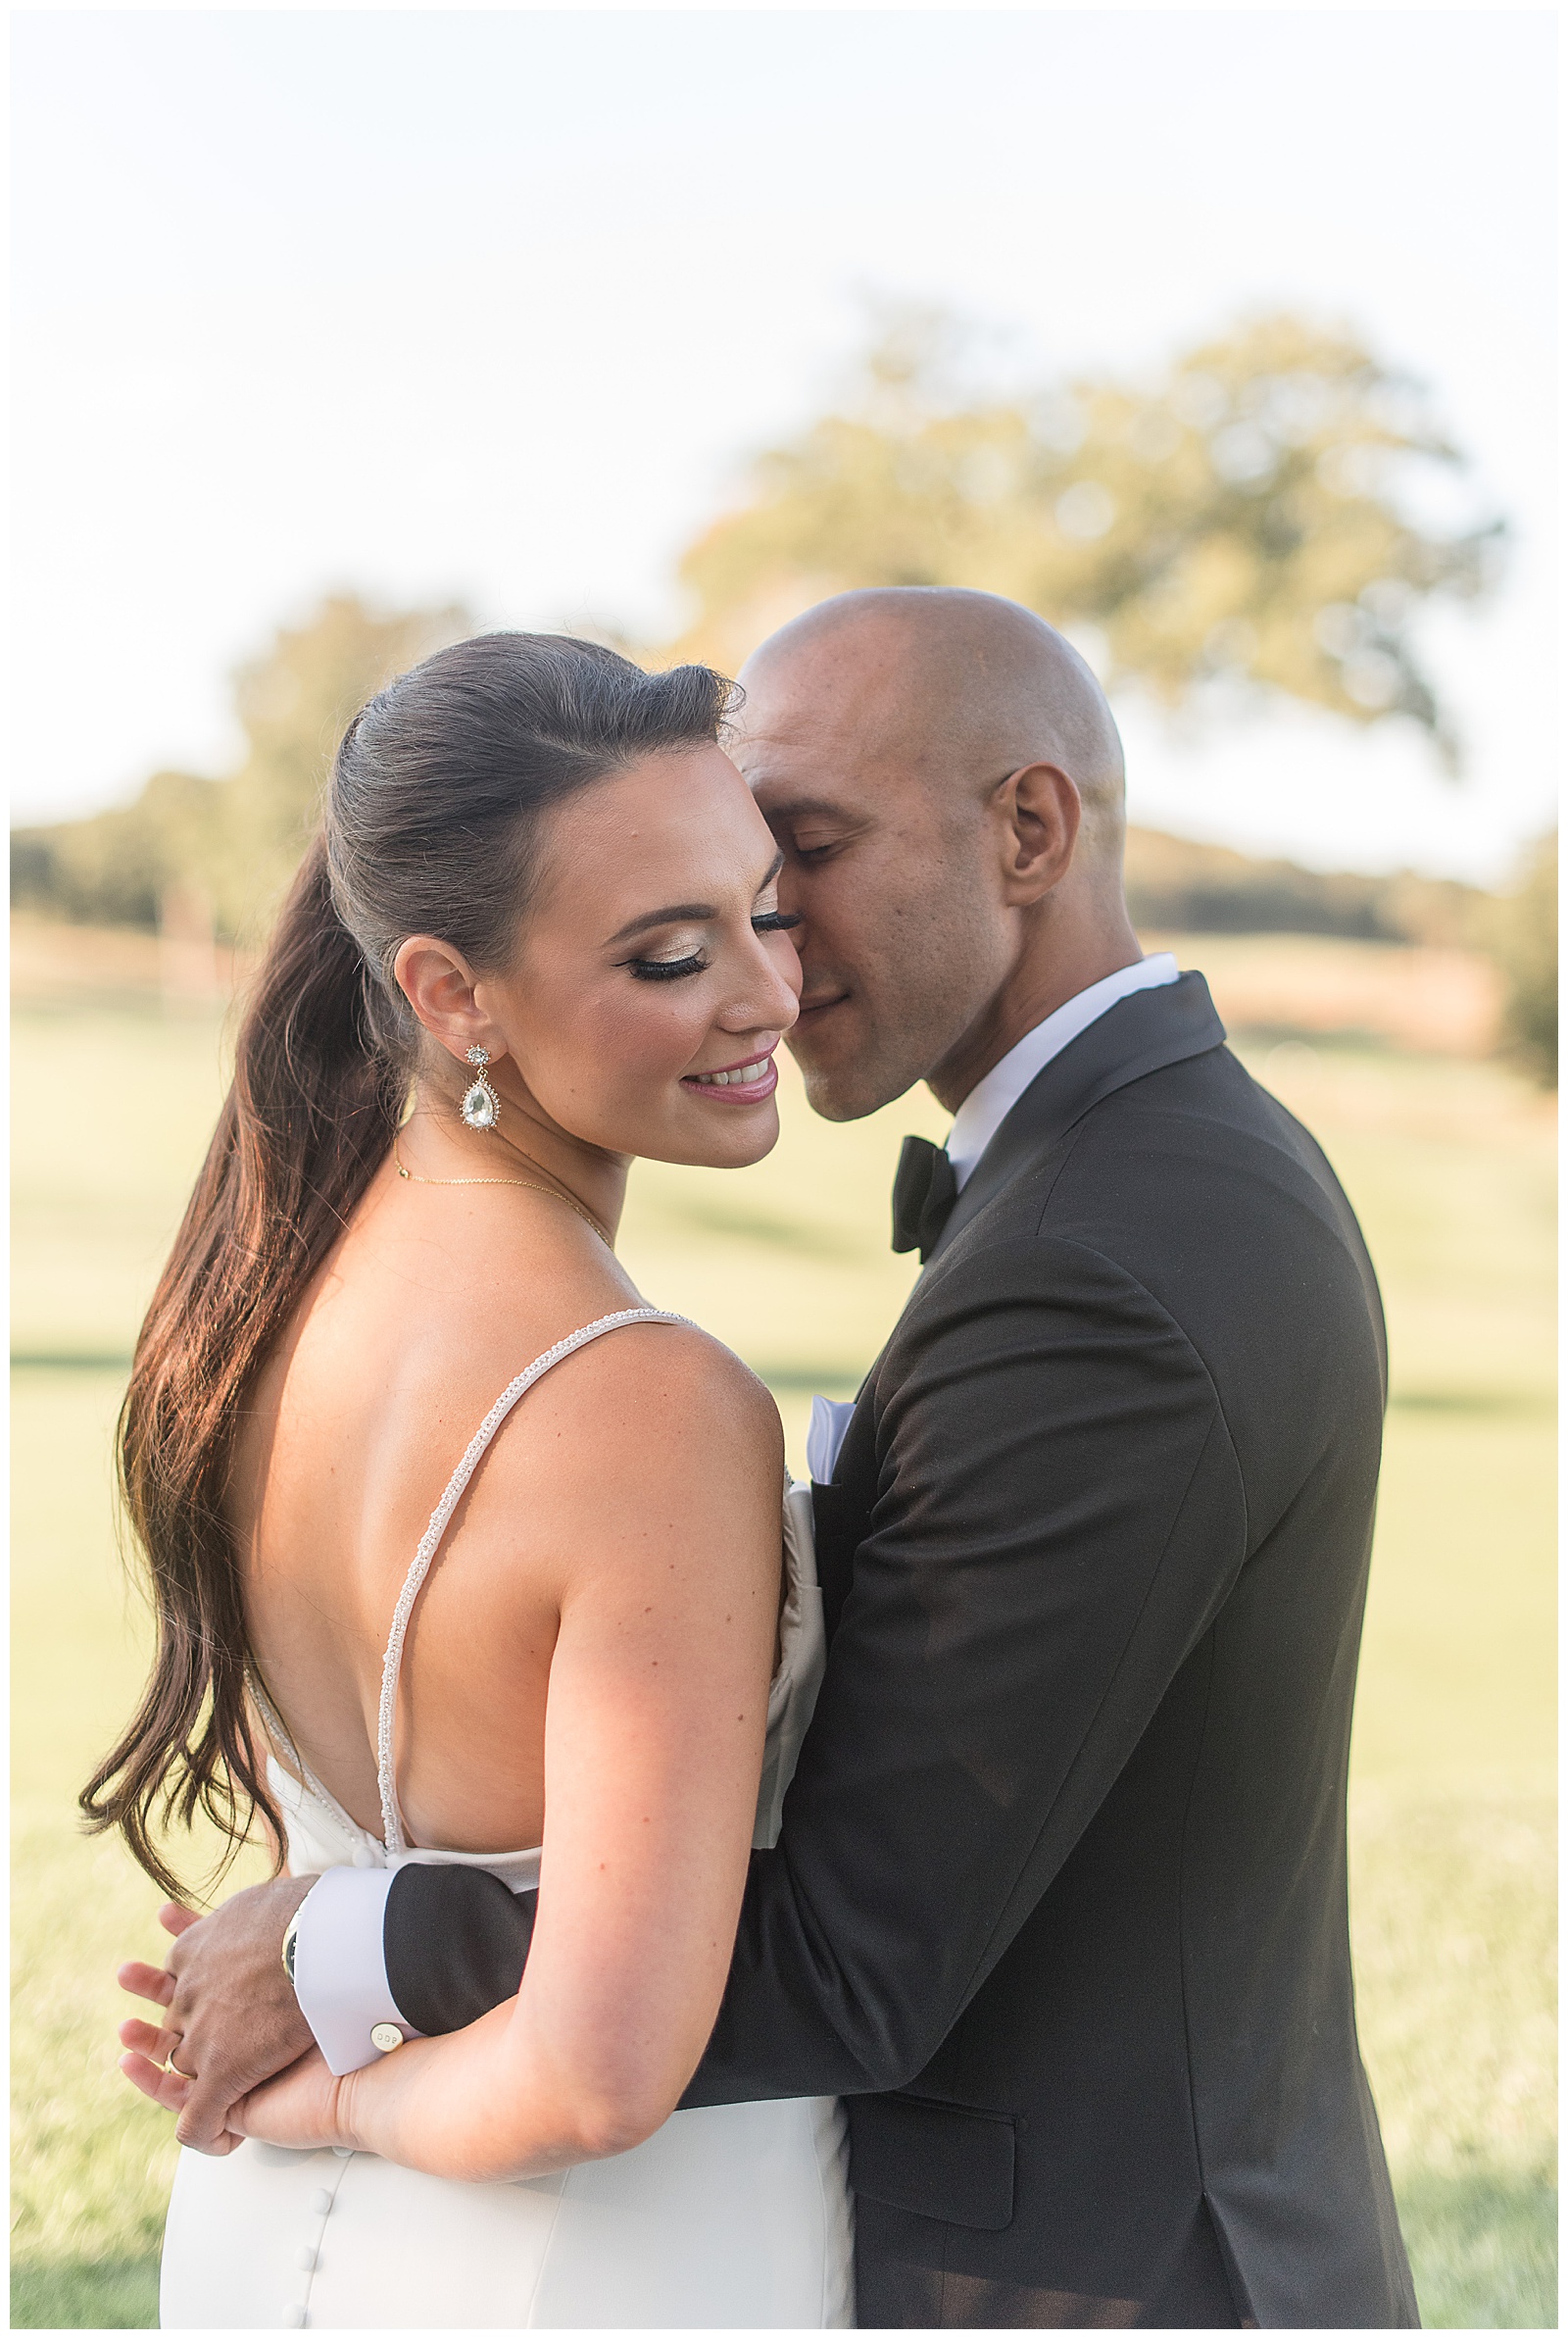 backs of bride and groom toward camera as she looks down and he kisses her left cheek at north jersey country club